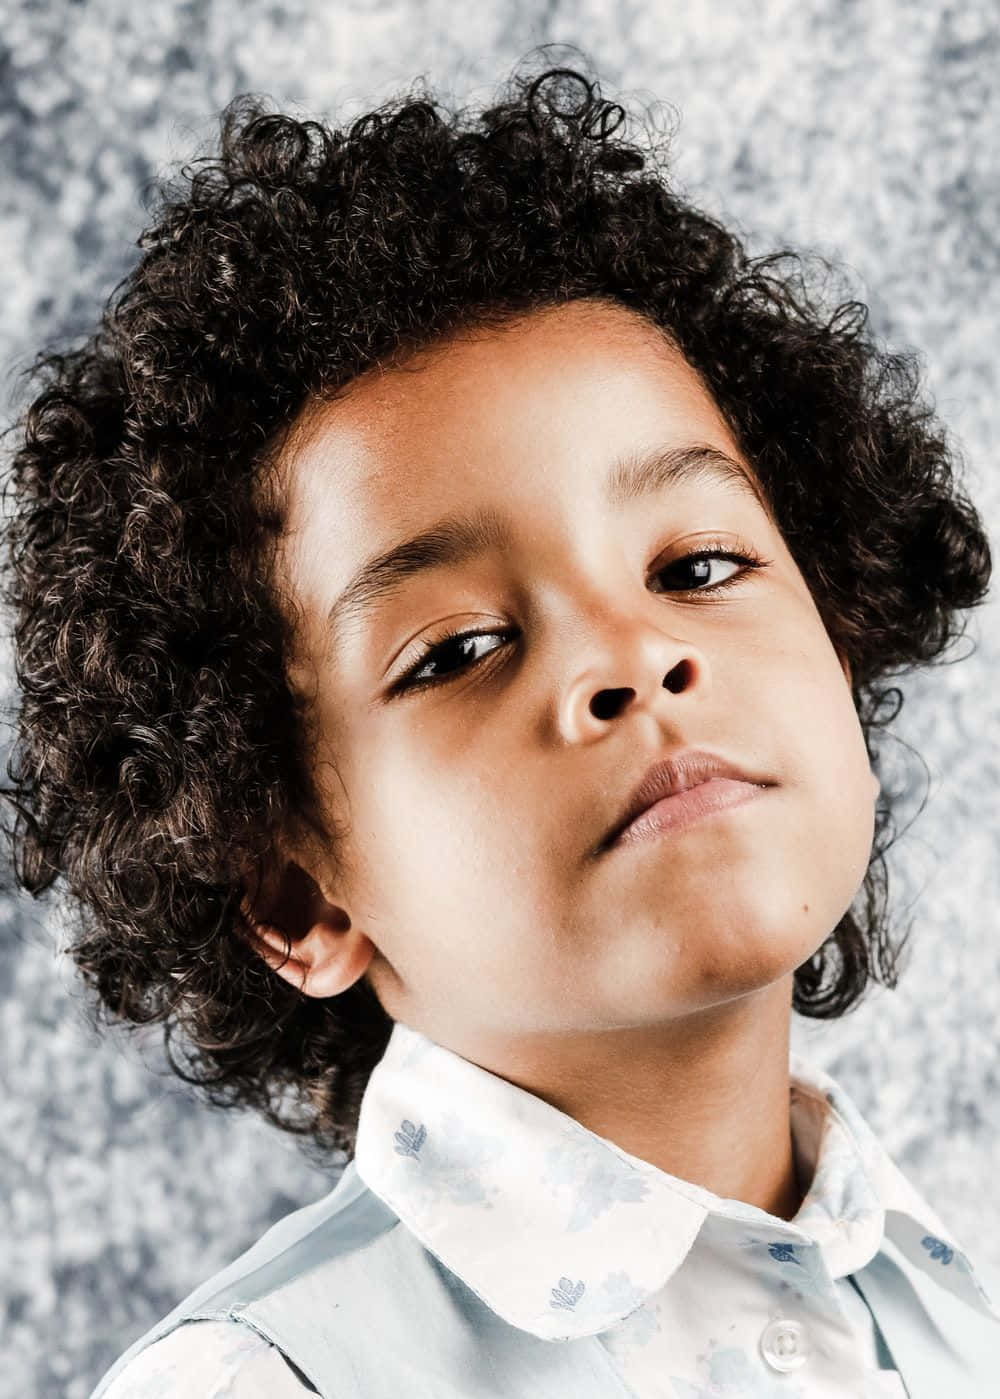 Confident Young Boywith Curly Hair Wallpaper